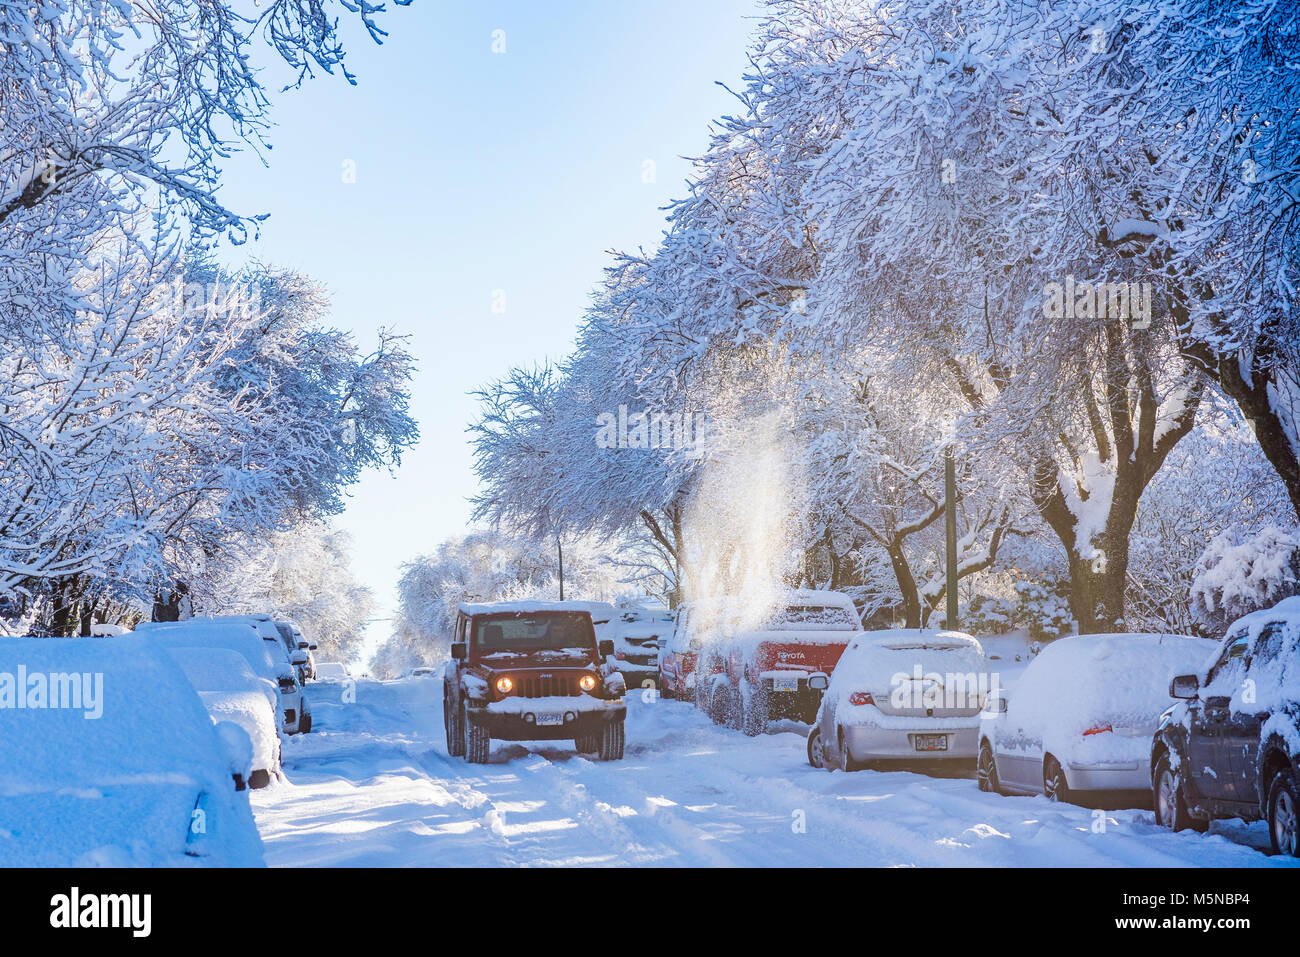 Snowy winter street in Vancouver, British Columbia, Canada. Stock Photo